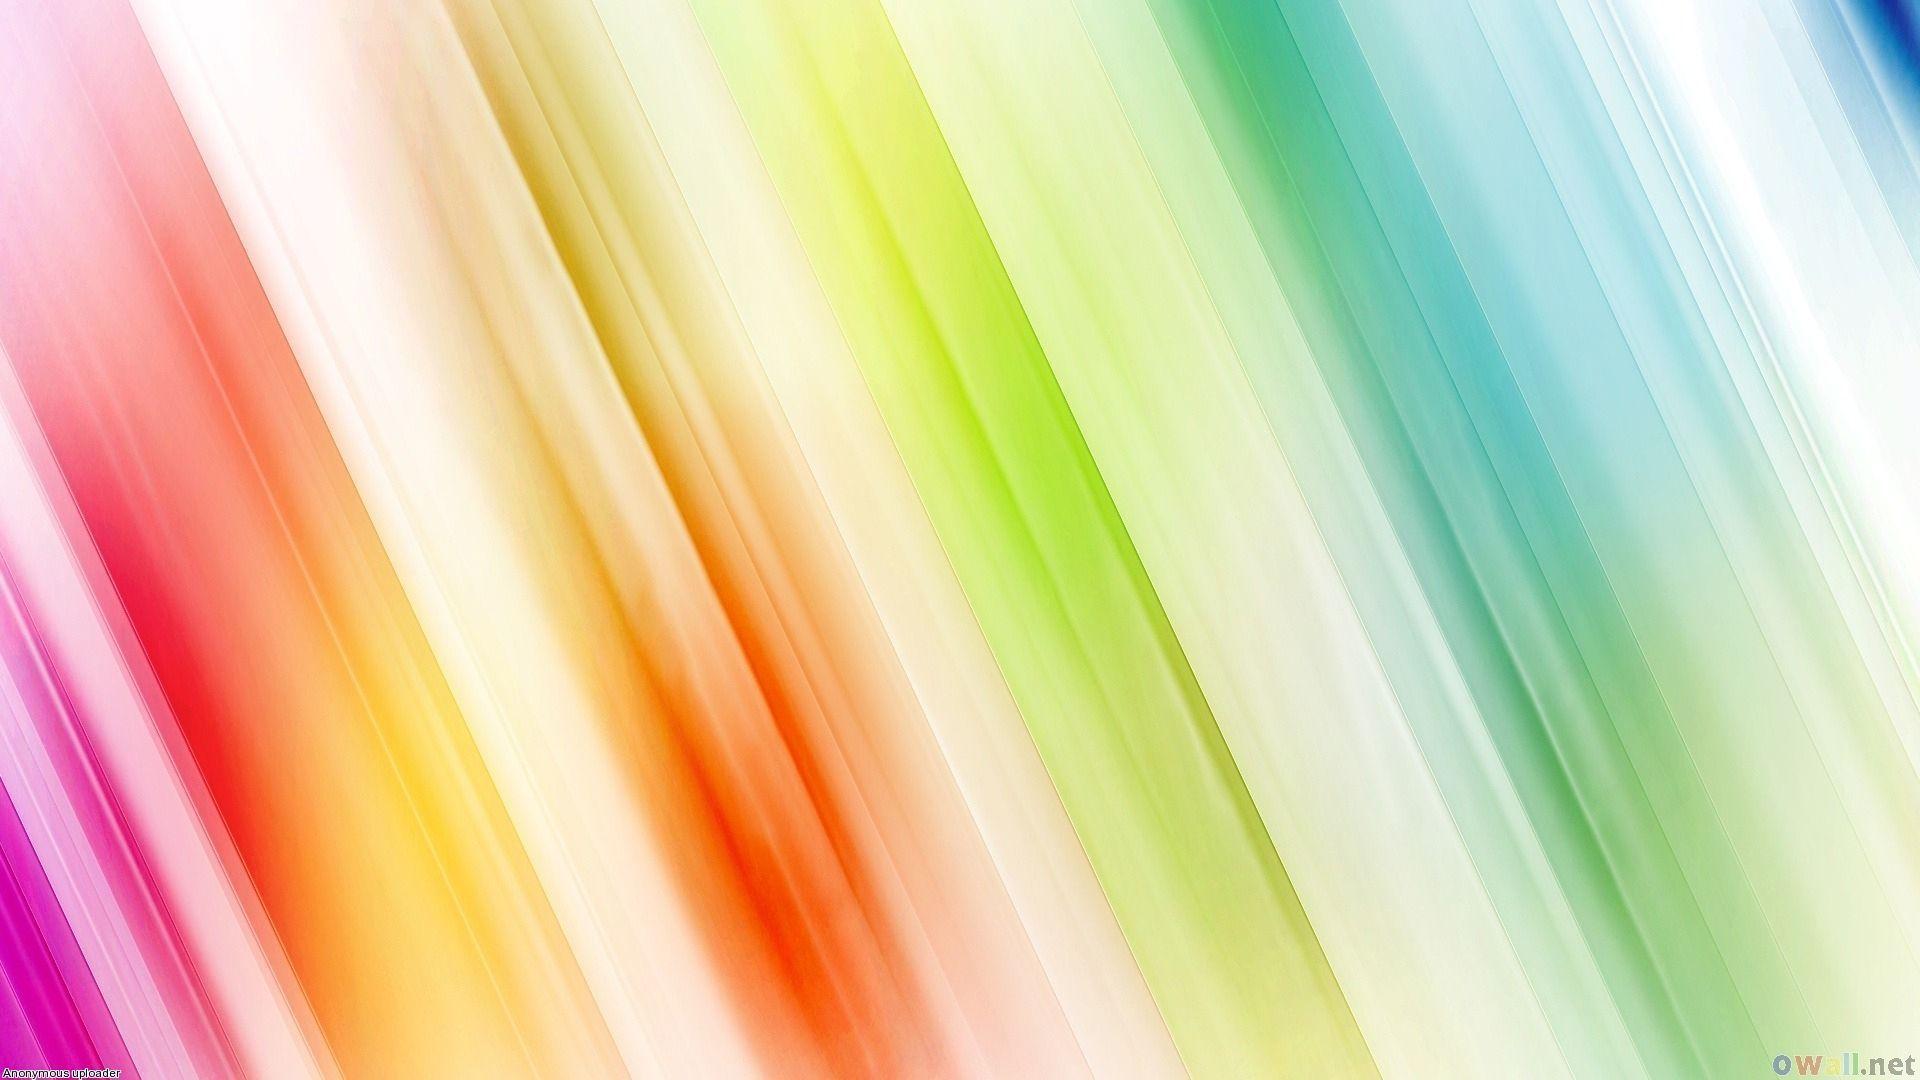 Apple Windows Colorful Wallpaper 1920x1080 px Free Download